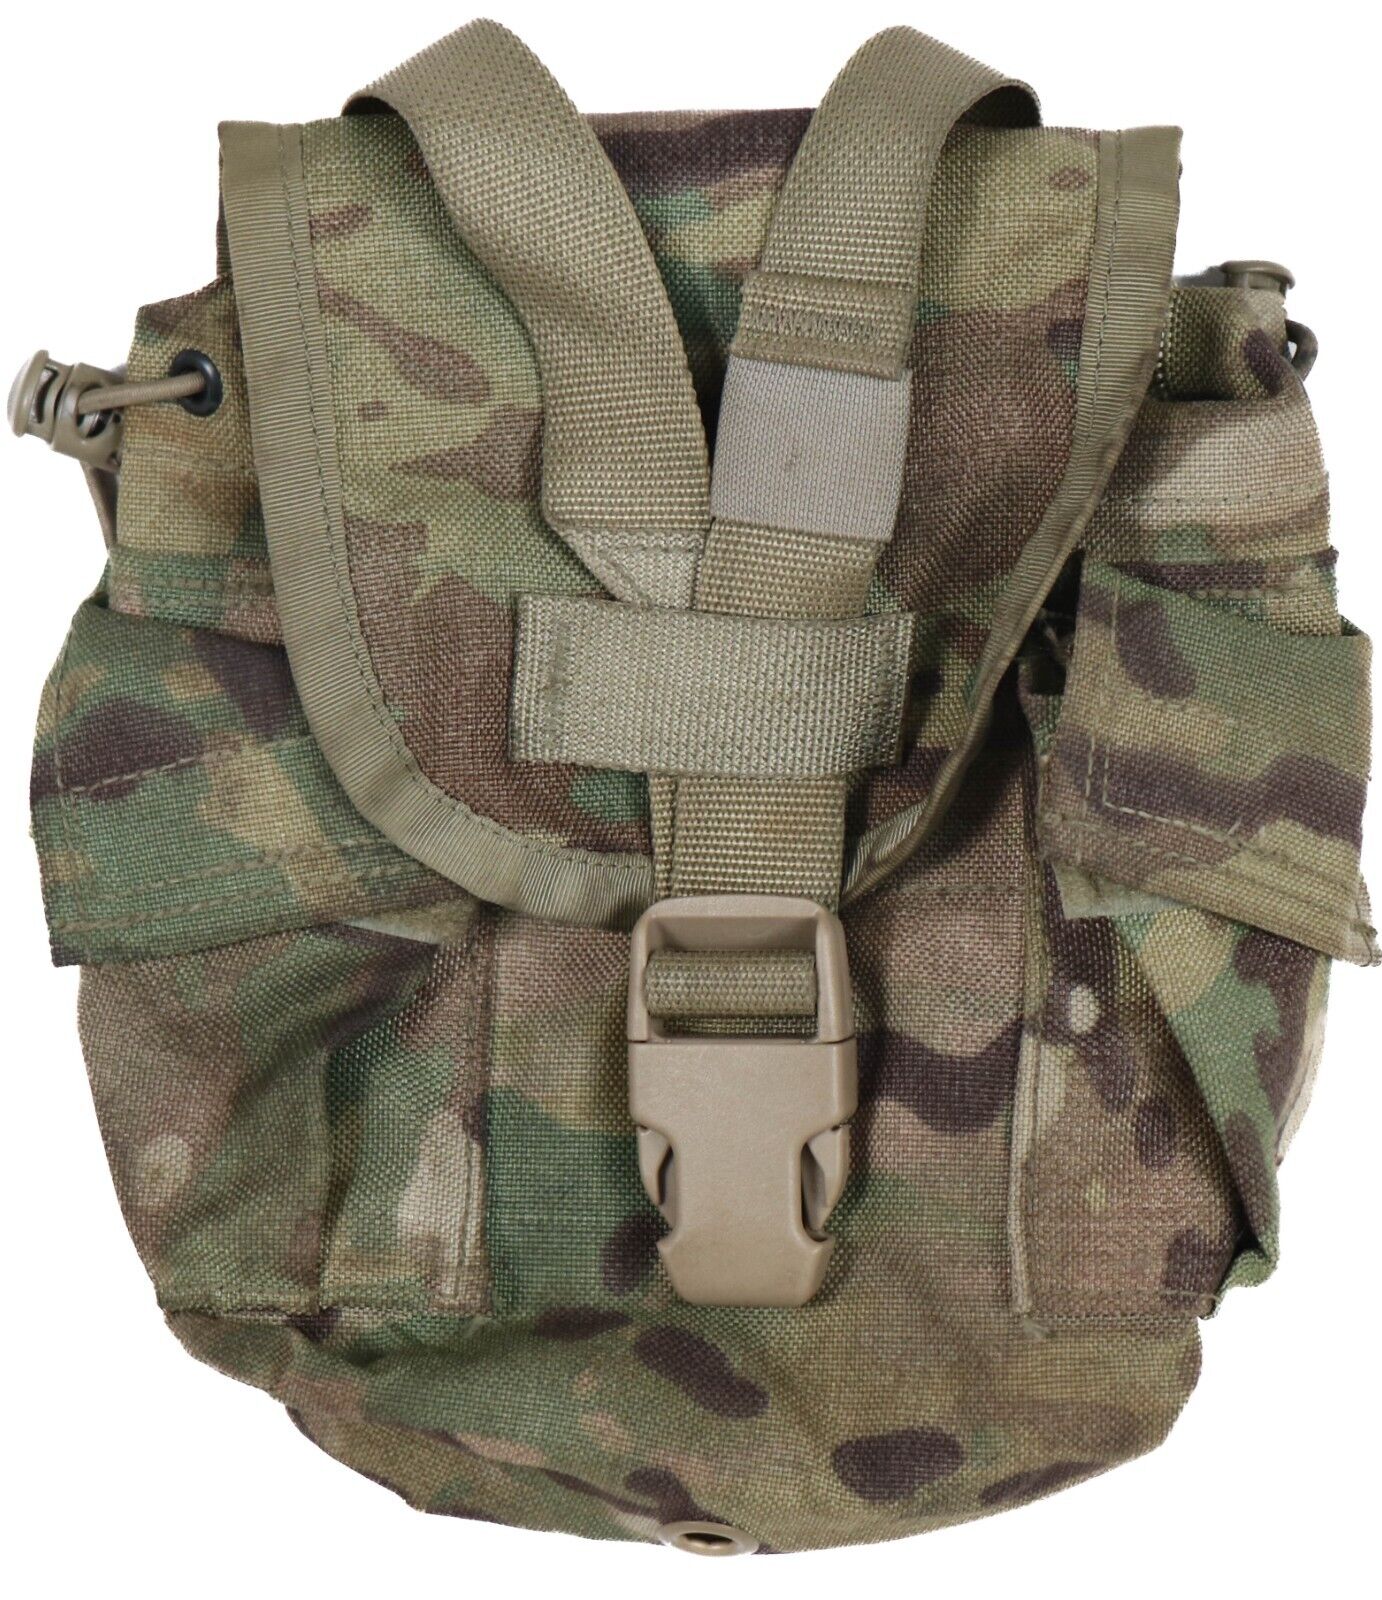 DAMAGED - Army 1 QT General Purpose Canteen Pouch Molle II Multicam OCP Woodland